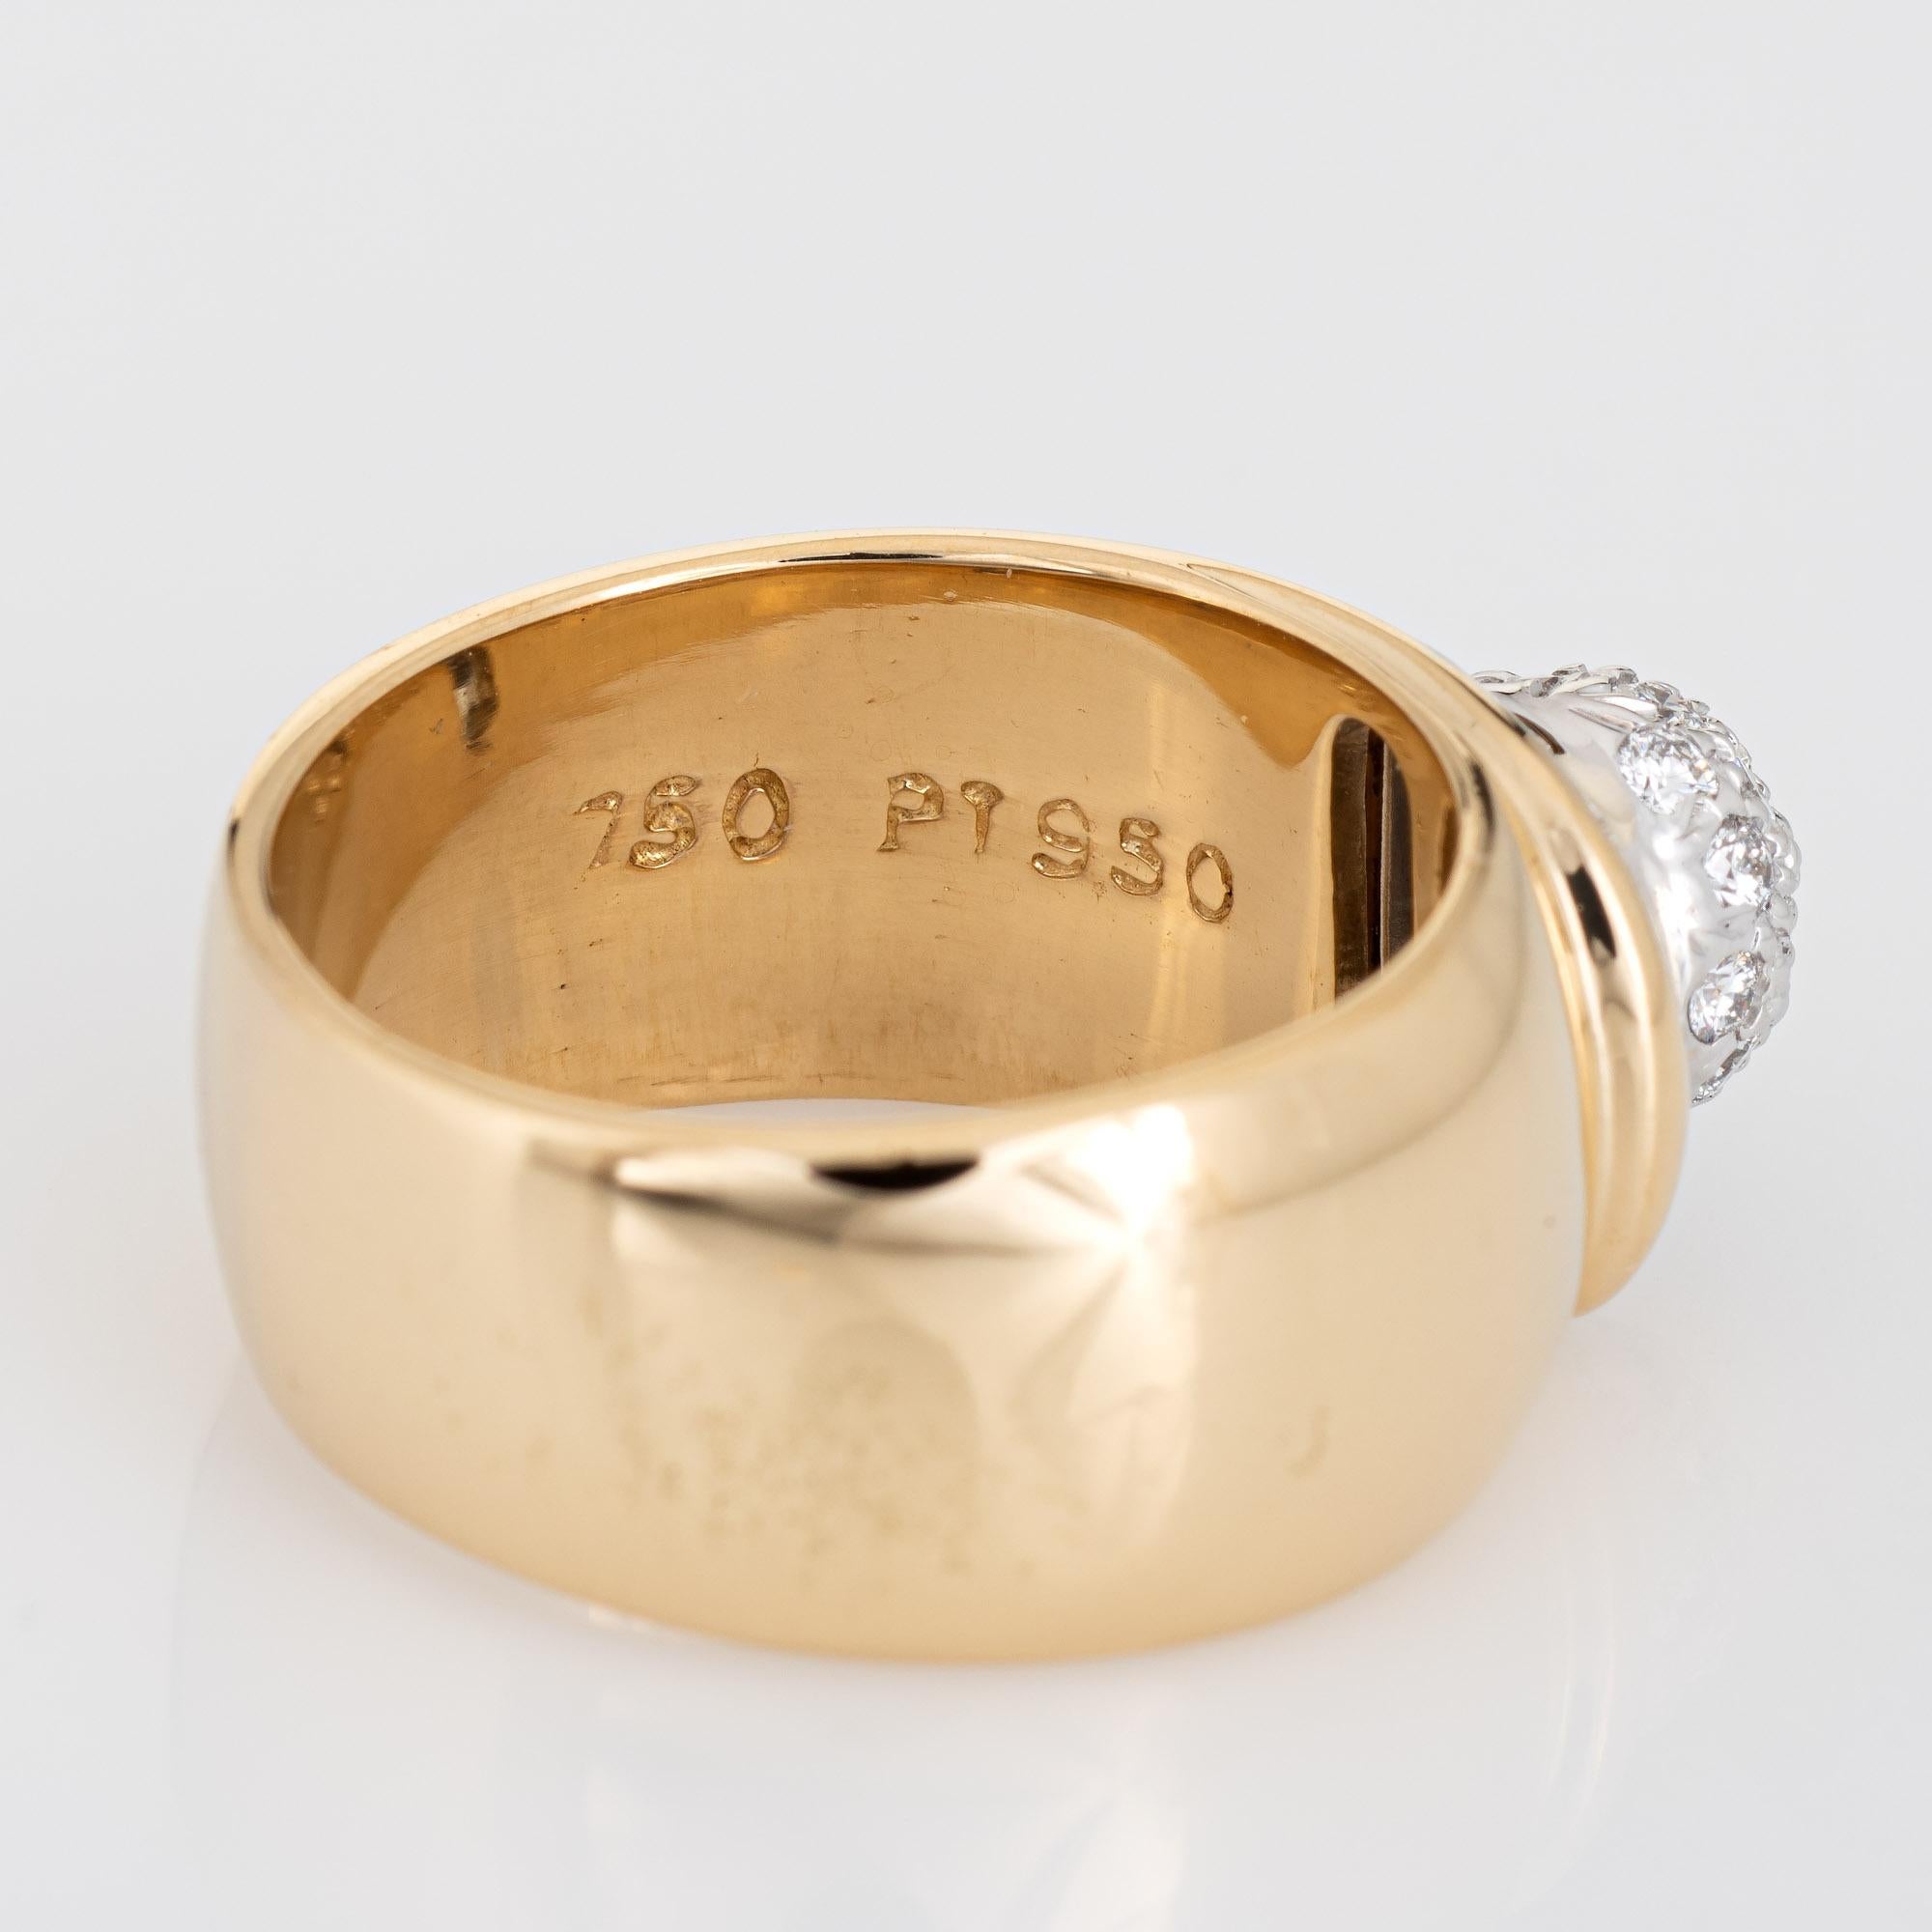 1980 Tiffany & Co Diamond Ball Ring Picasso Vintage 18k Gold Wide Band 6.25 en vente 1